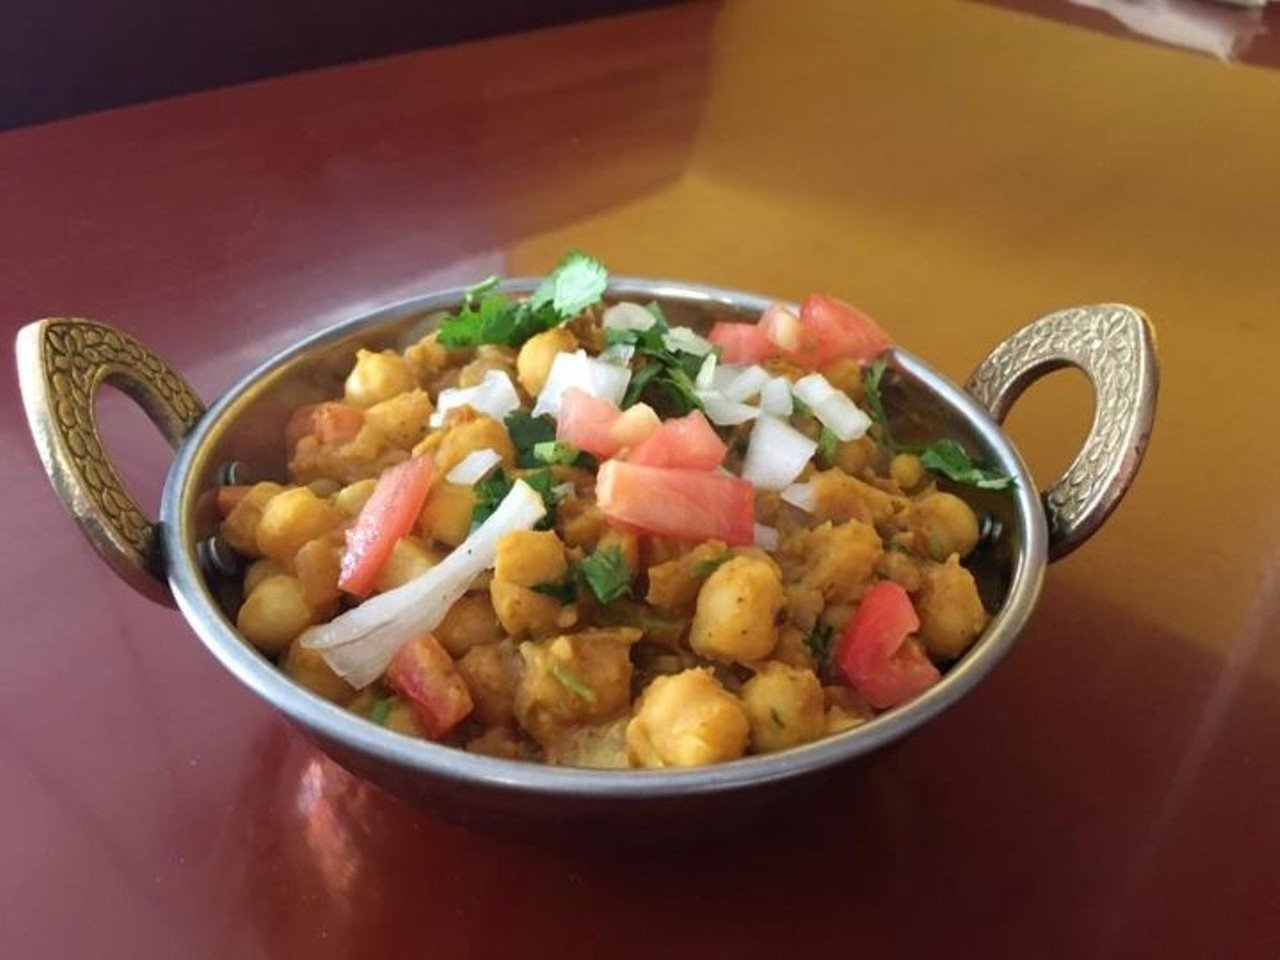 Kathmandu Kitchen and Bar
3825 Bardstown Rd. 
Specializing in Nepali and Indian cuisine, Kathmandu Kitchen is a treat and a flavor adventure. IYKYK. It is definitely the kind of place that&#146;s the &#147;secret&#148; fave of many. Photo via Kathmandu Kitchen and Bar